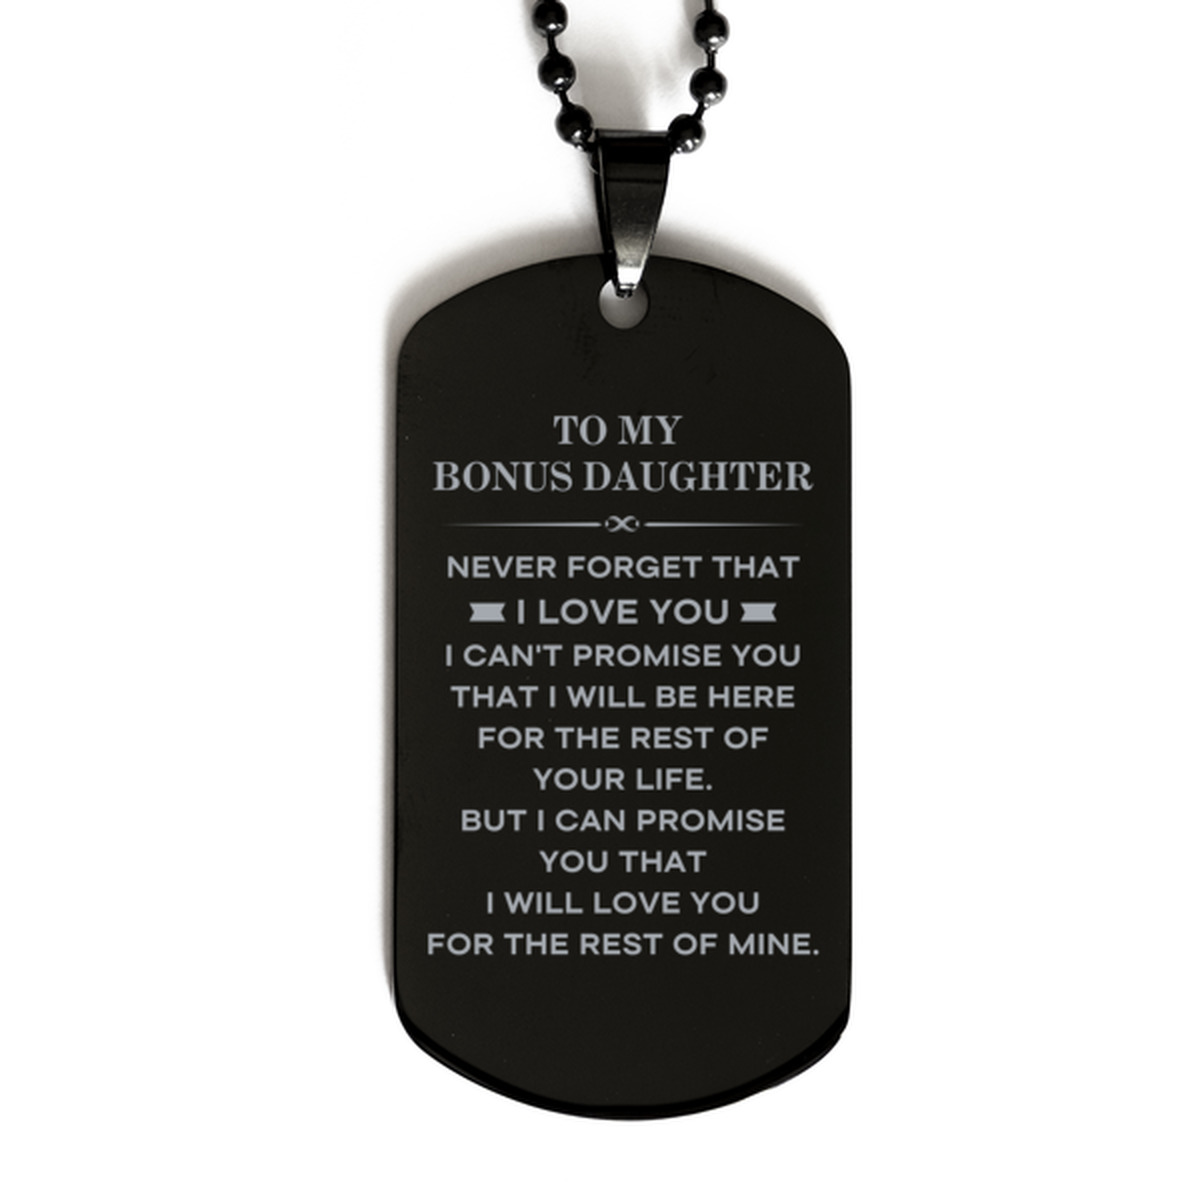 To My Bonus Daughter Gifts, I will love you for the rest of mine, Love Bonus Daughter Dog Tag Necklace, Birthday Christmas Unique Black Dog Tag For Bonus Daughter